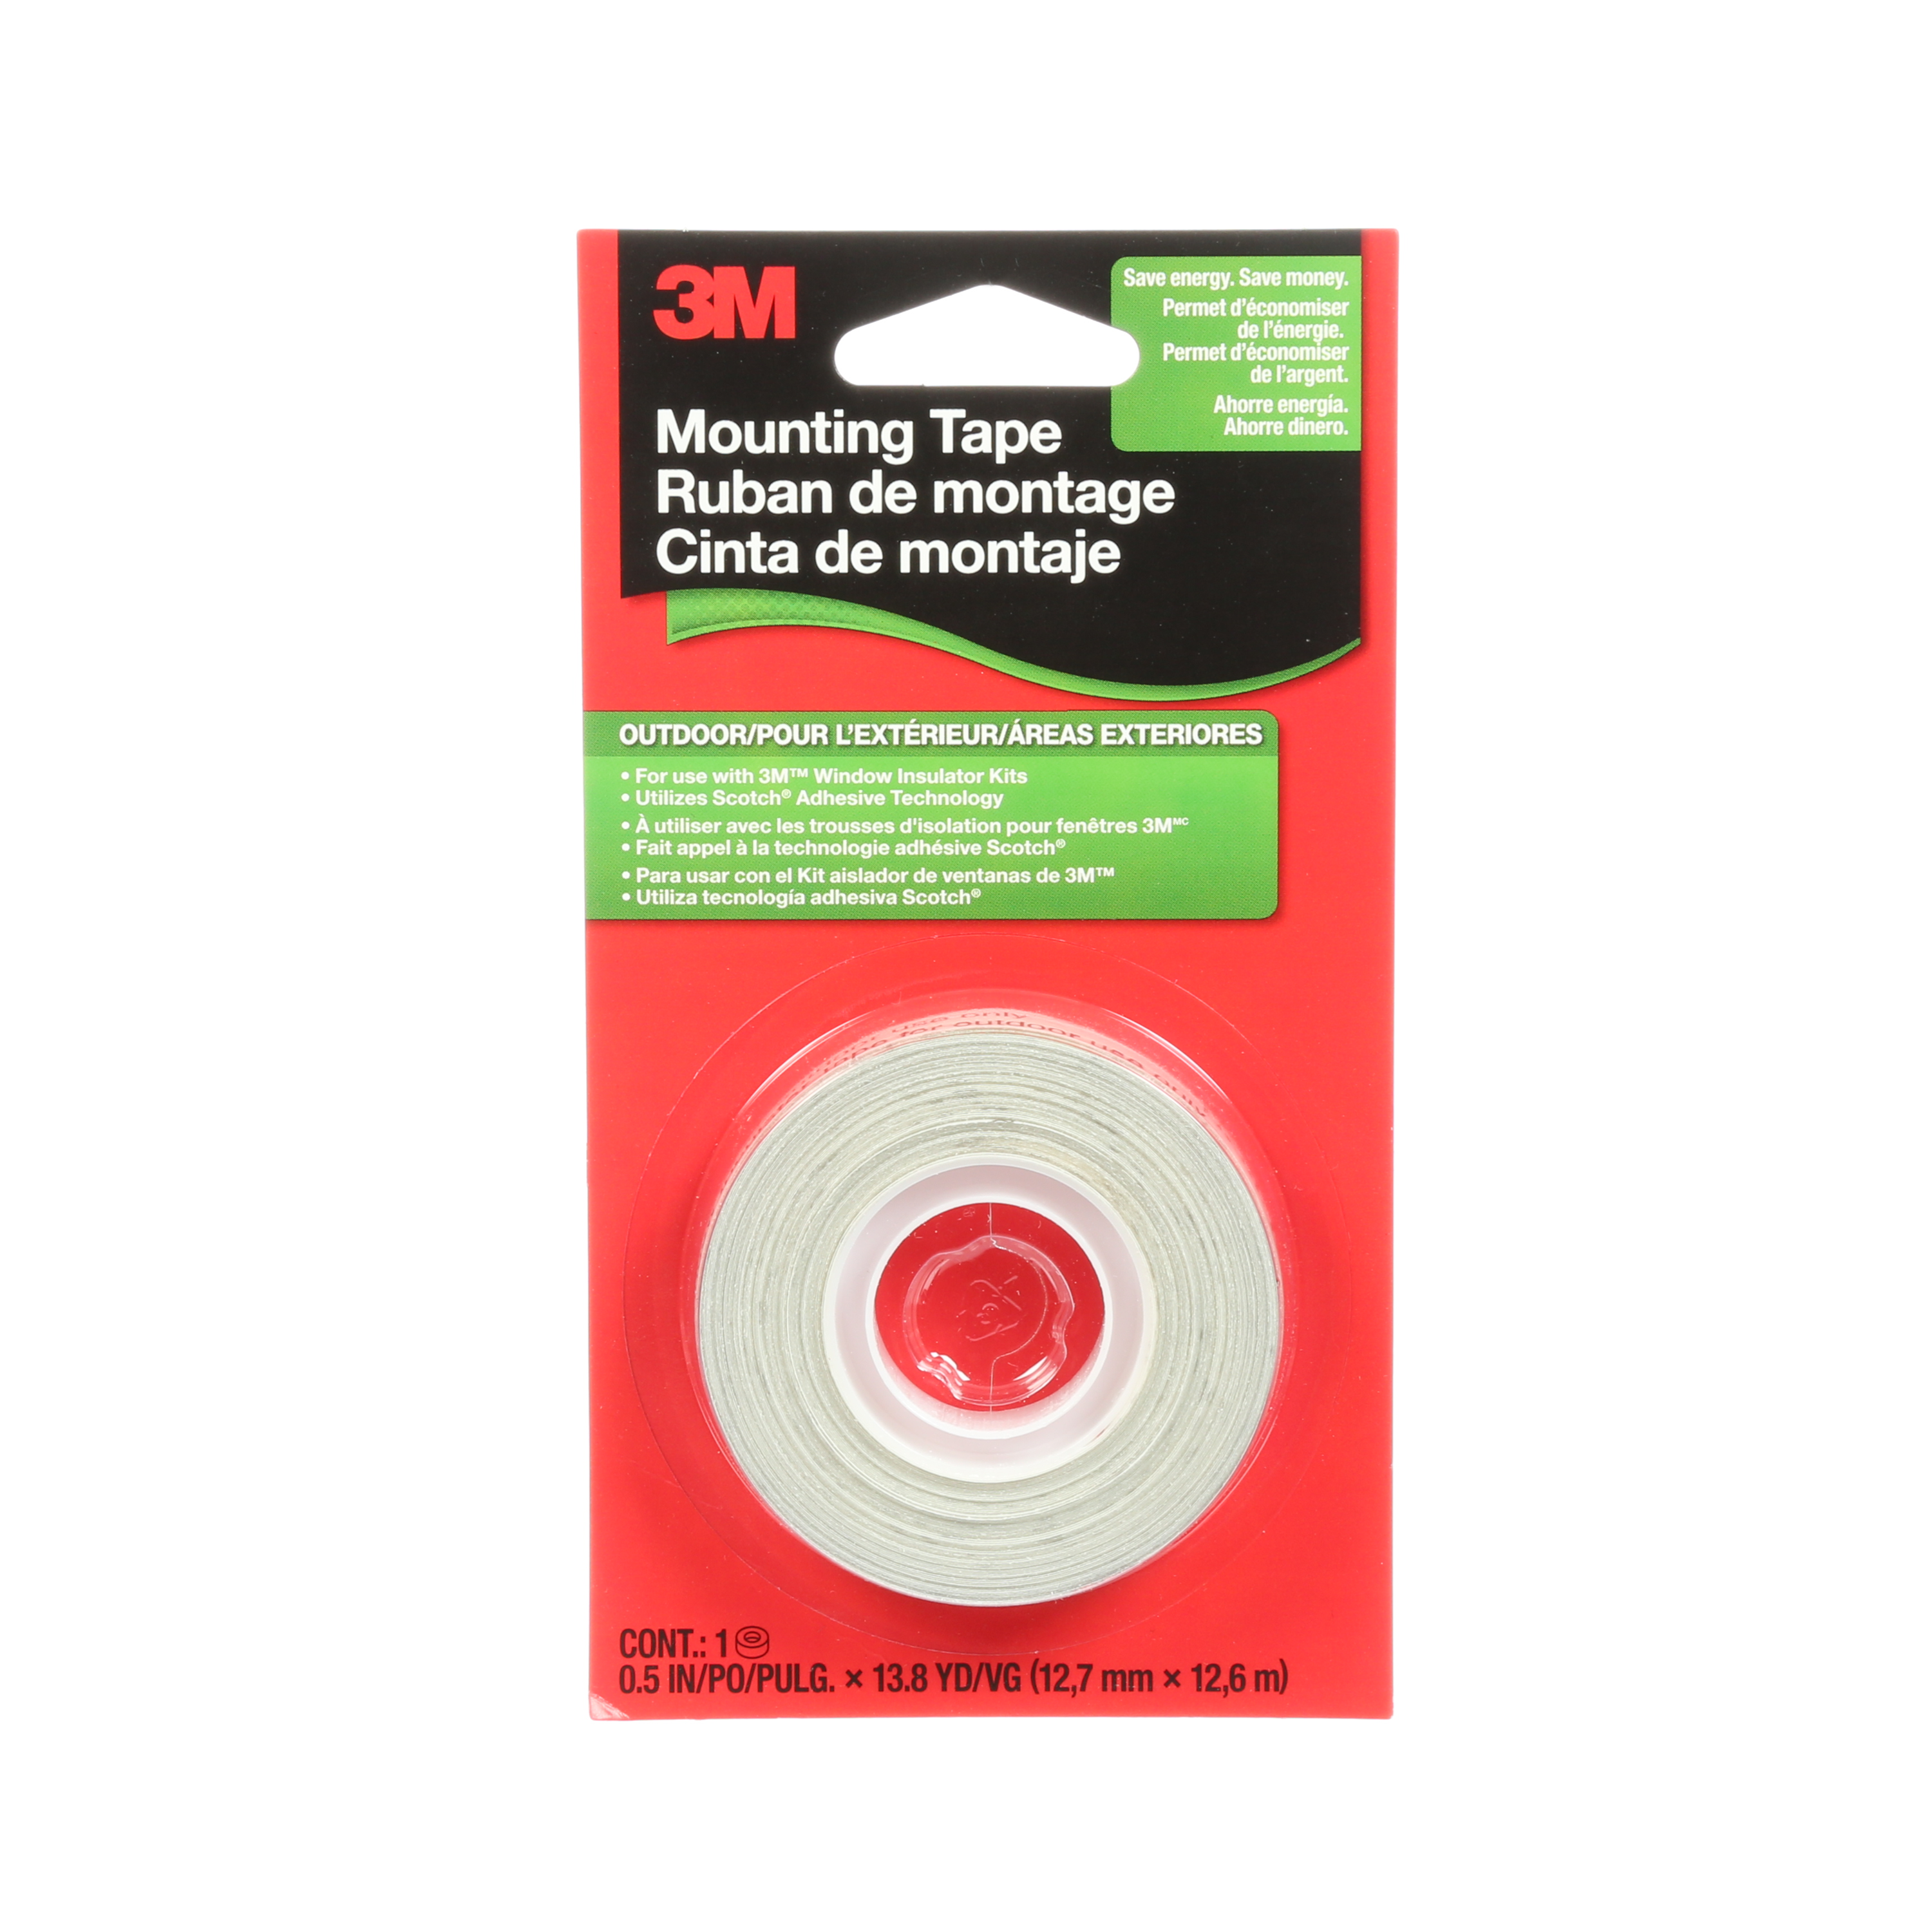 3M 53224, Outdoor Window Film Mounting Tape 2175C, 1/2 in x 13.8 yd, Clear, 7100075754